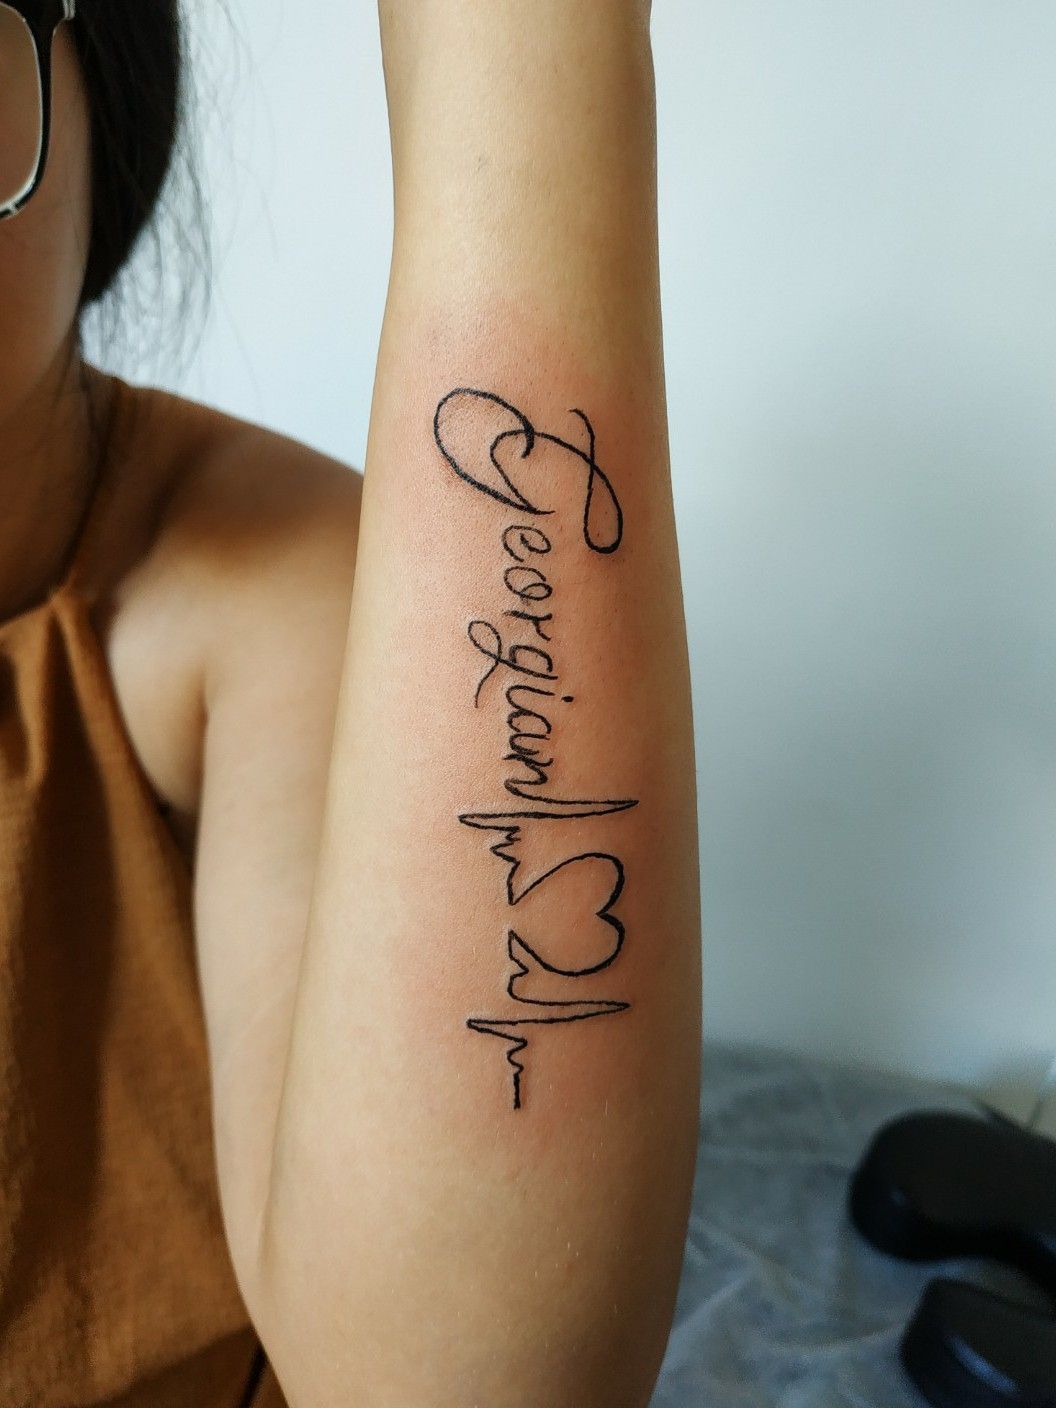 What are some simple heartbeat tattoo on wrist? by mirasorvin - Issuu